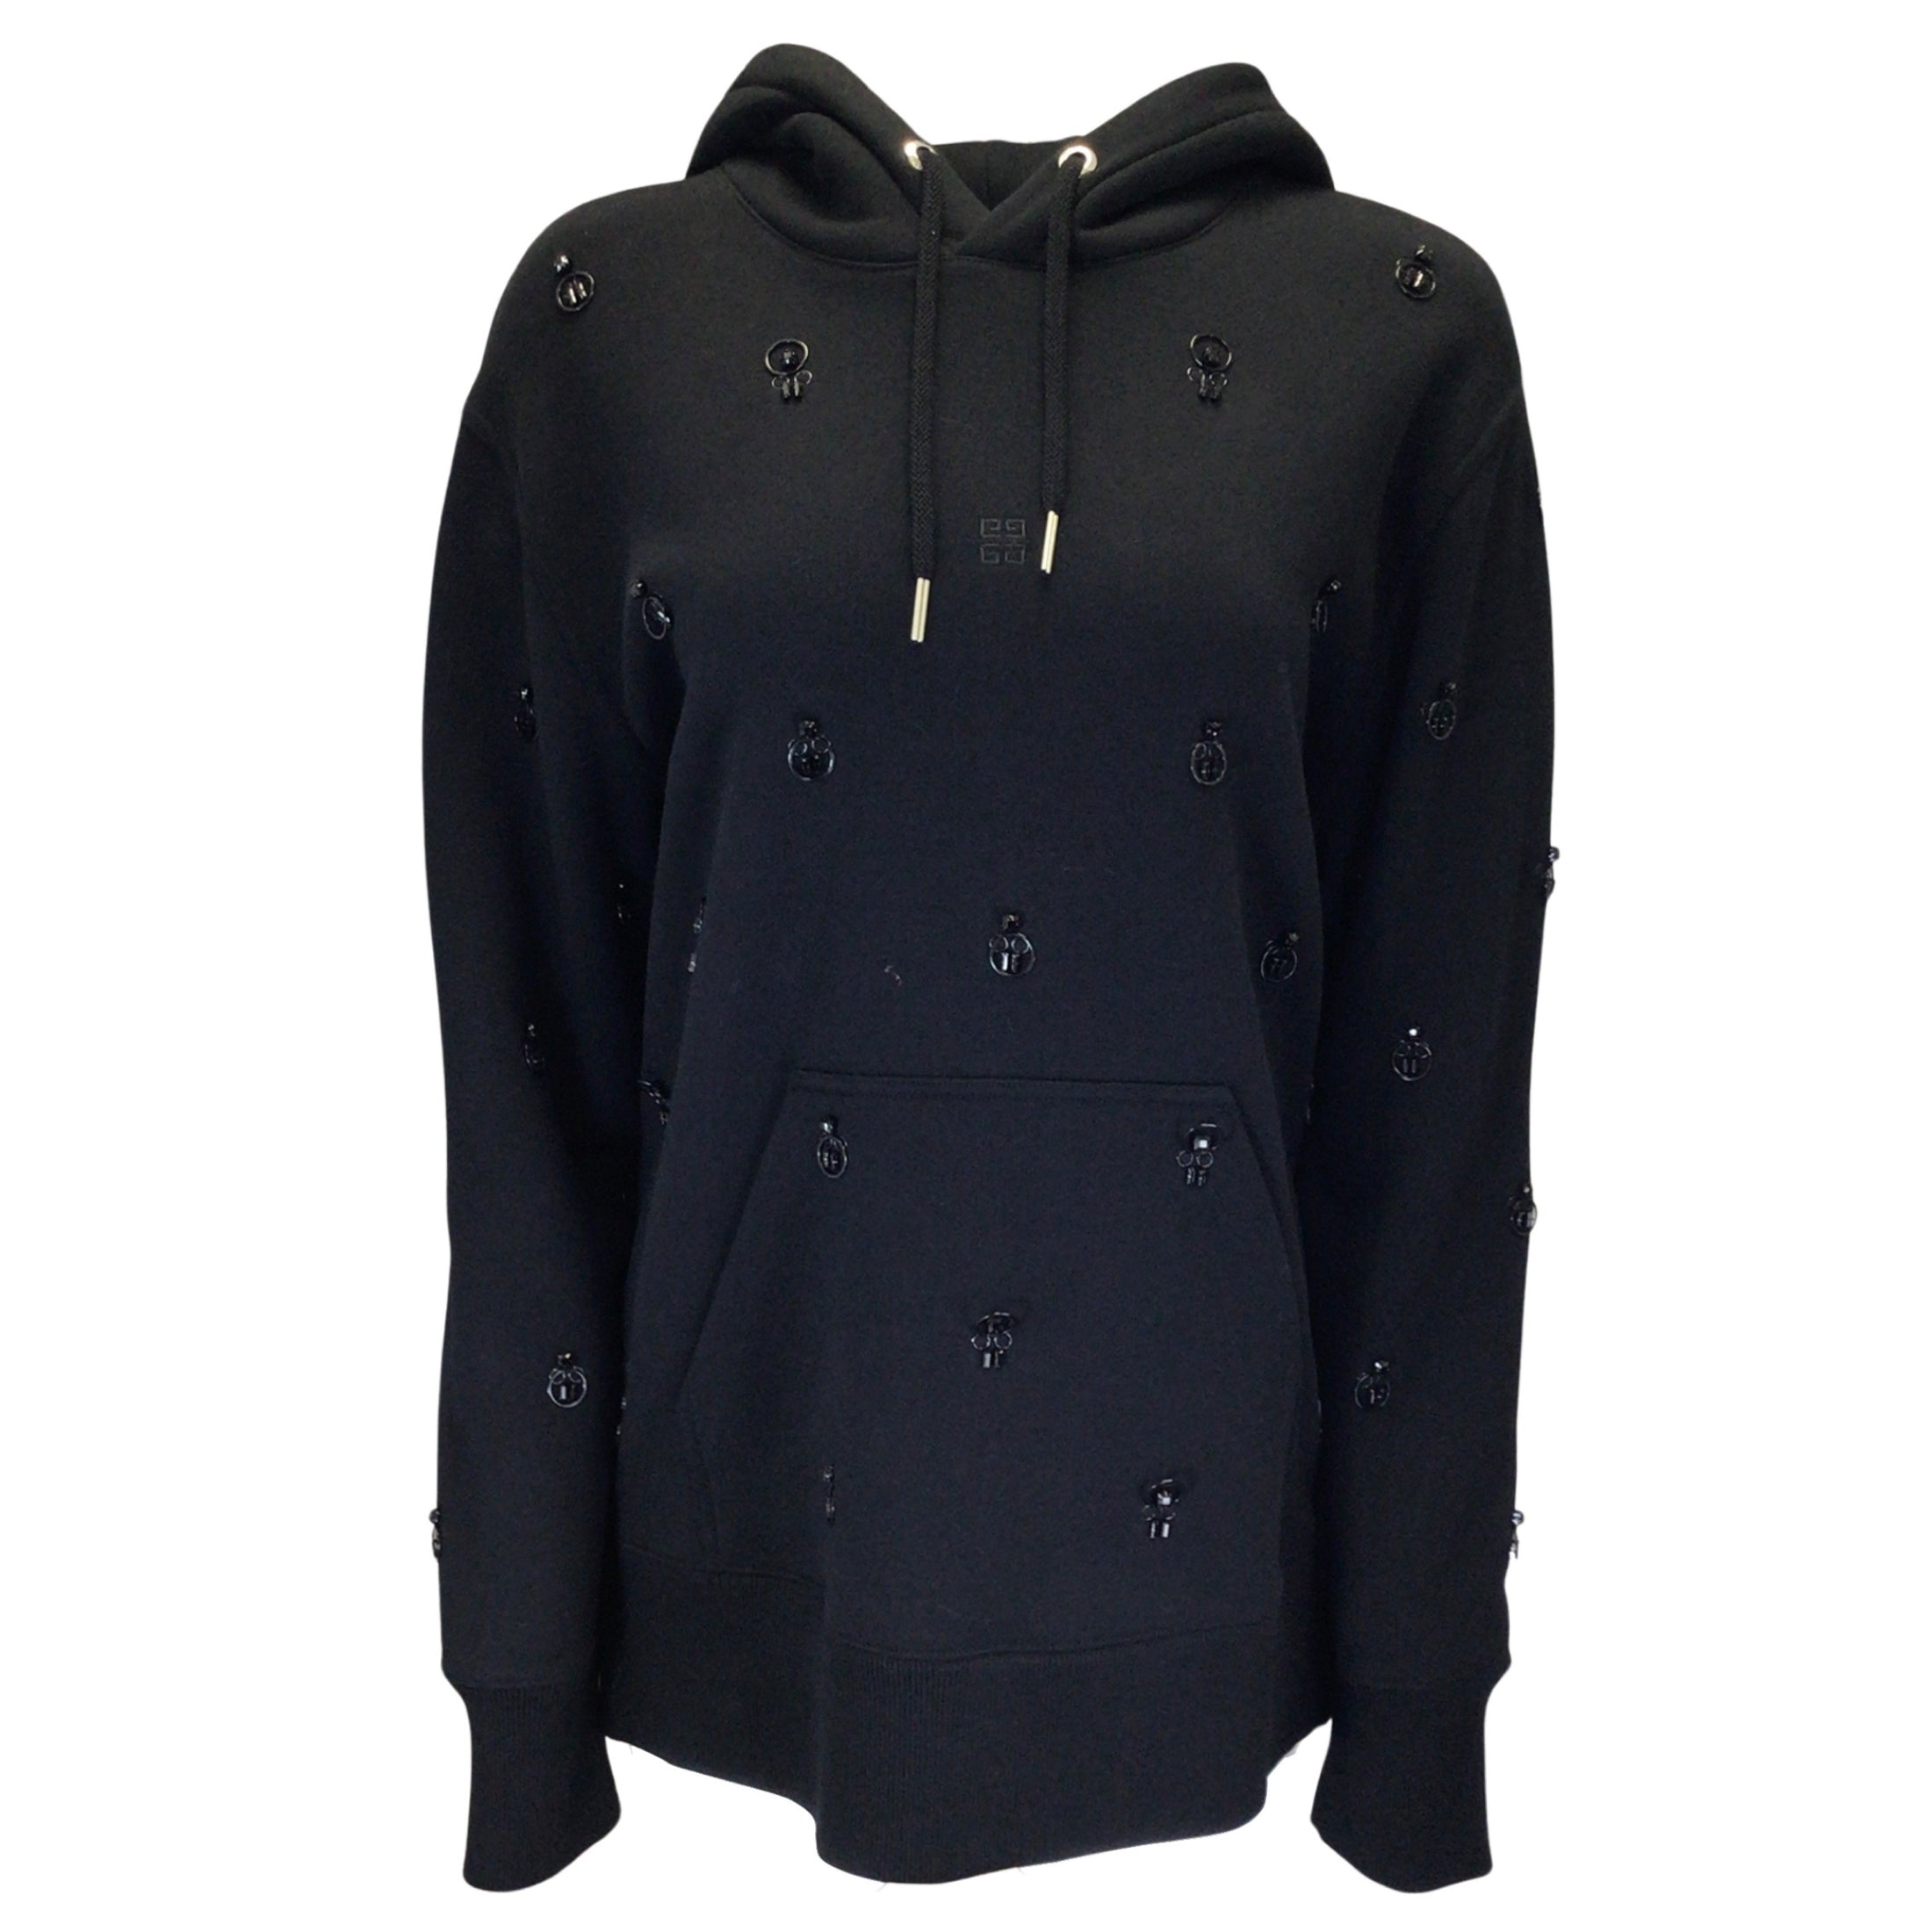 Givenchy Black Metal Embellished Hooded Classic Fit Cotton Sweatshirt